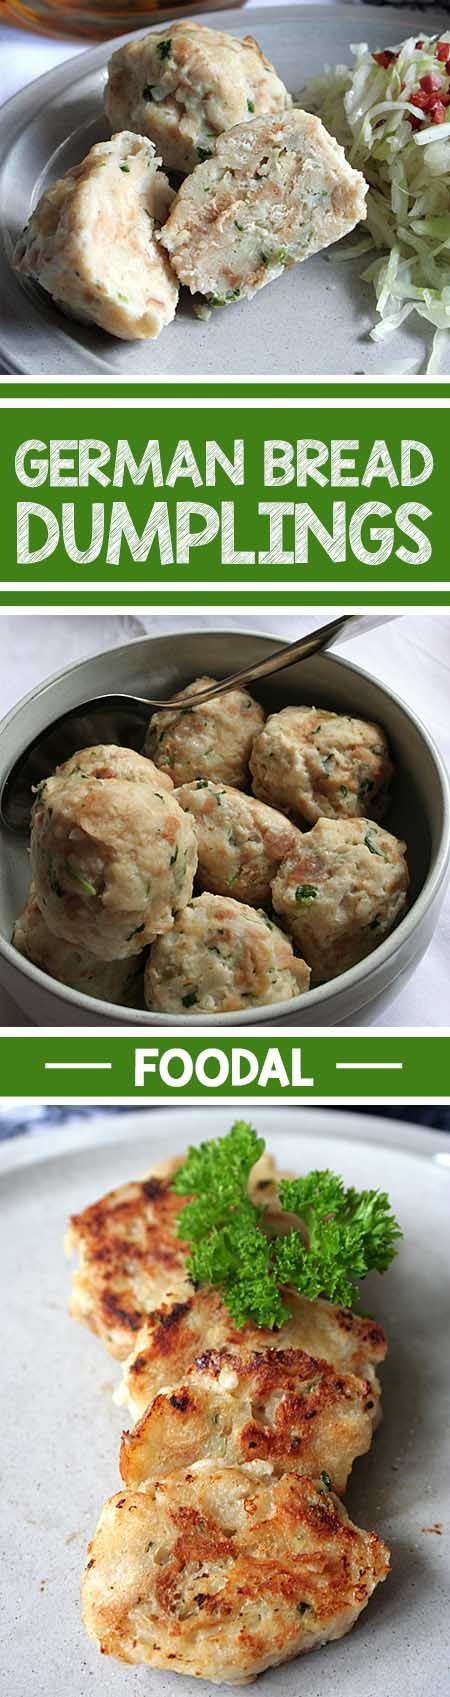 Use up day-old buns and bread in these famous Southern German dumplings, and enjoy a versatile side dish with any savory meal –